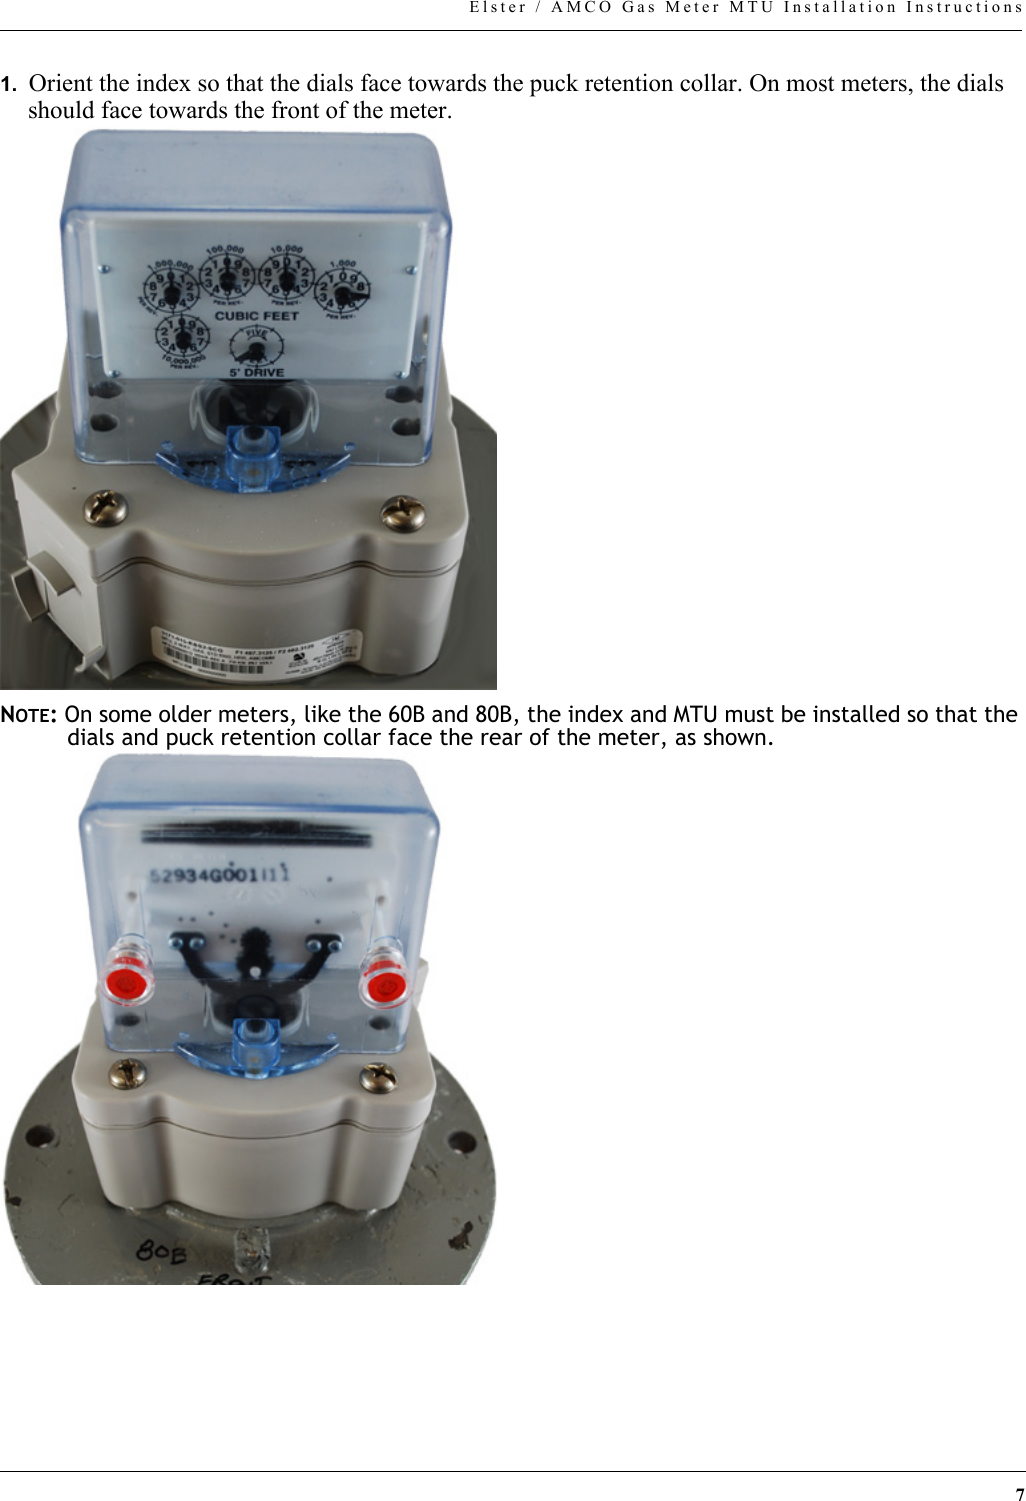 7Elster / AMCO Gas Meter MTU Installation Instructions1.  Orient the index so that the dials face towards the puck retention collar. On most meters, the dials should face towards the front of the meter.NOTE: On some older meters, like the 60B and 80B, the index and MTU must be installed so that the dials and puck retention collar face the rear of the meter, as shown.